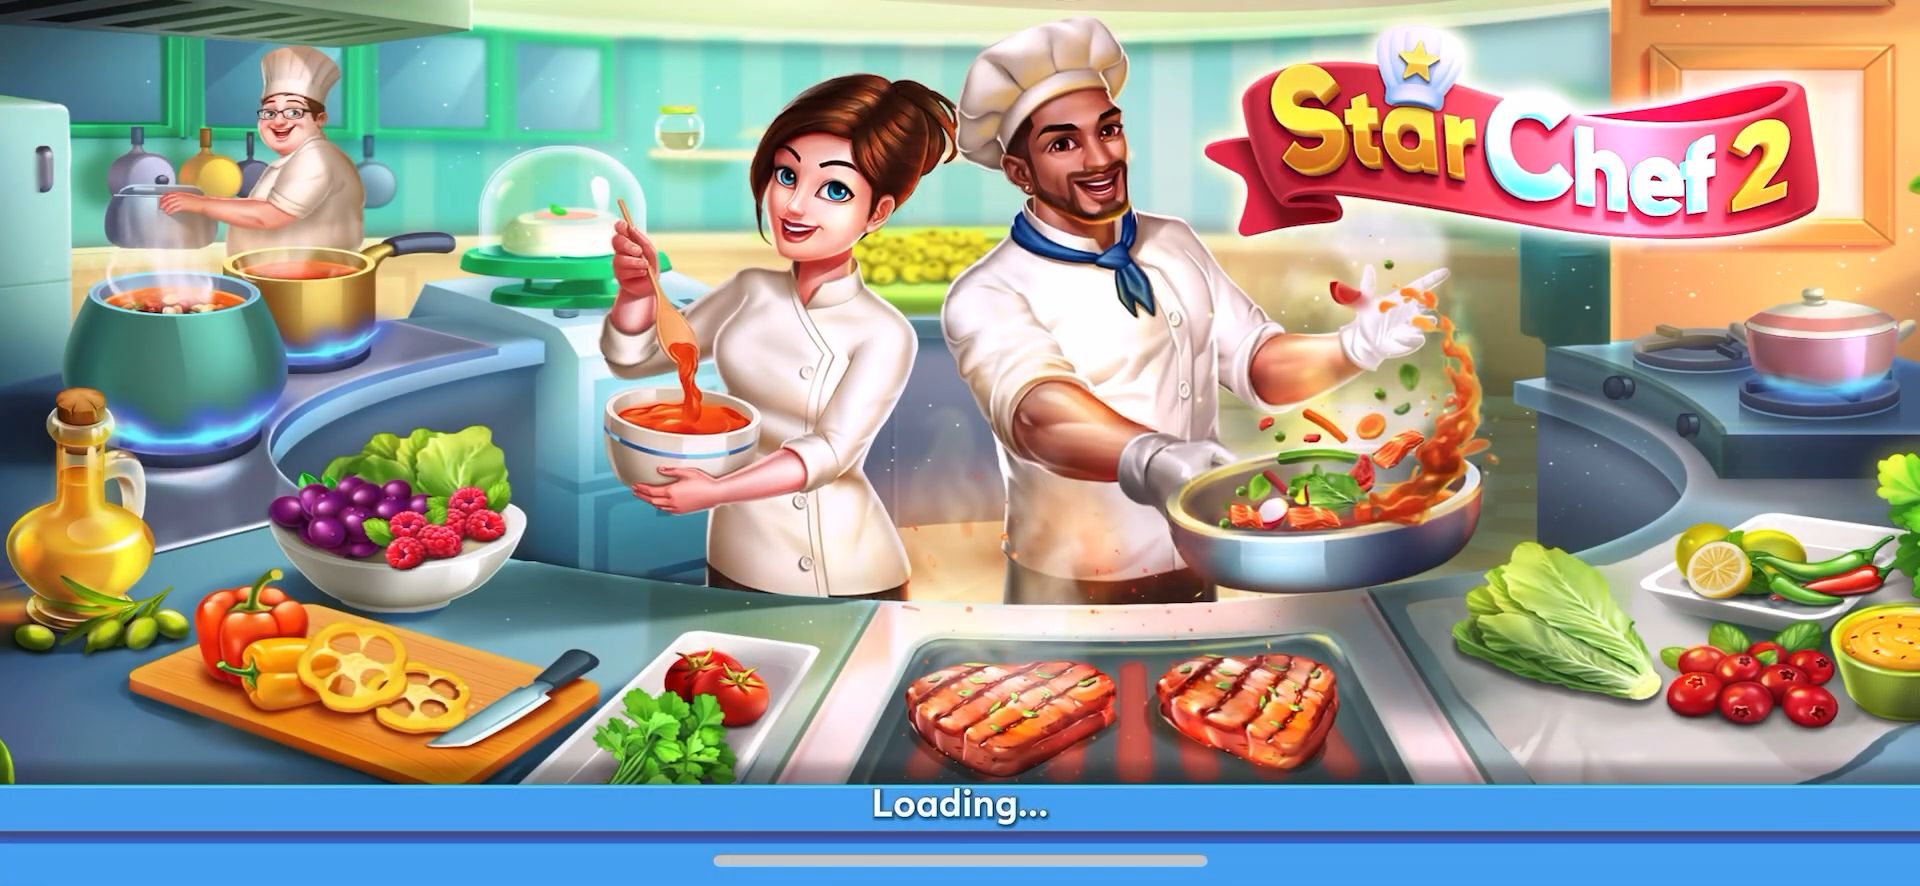 Download Tasty Cooking Cafe & Restaurant Game: Star Chef 2 Android free game.